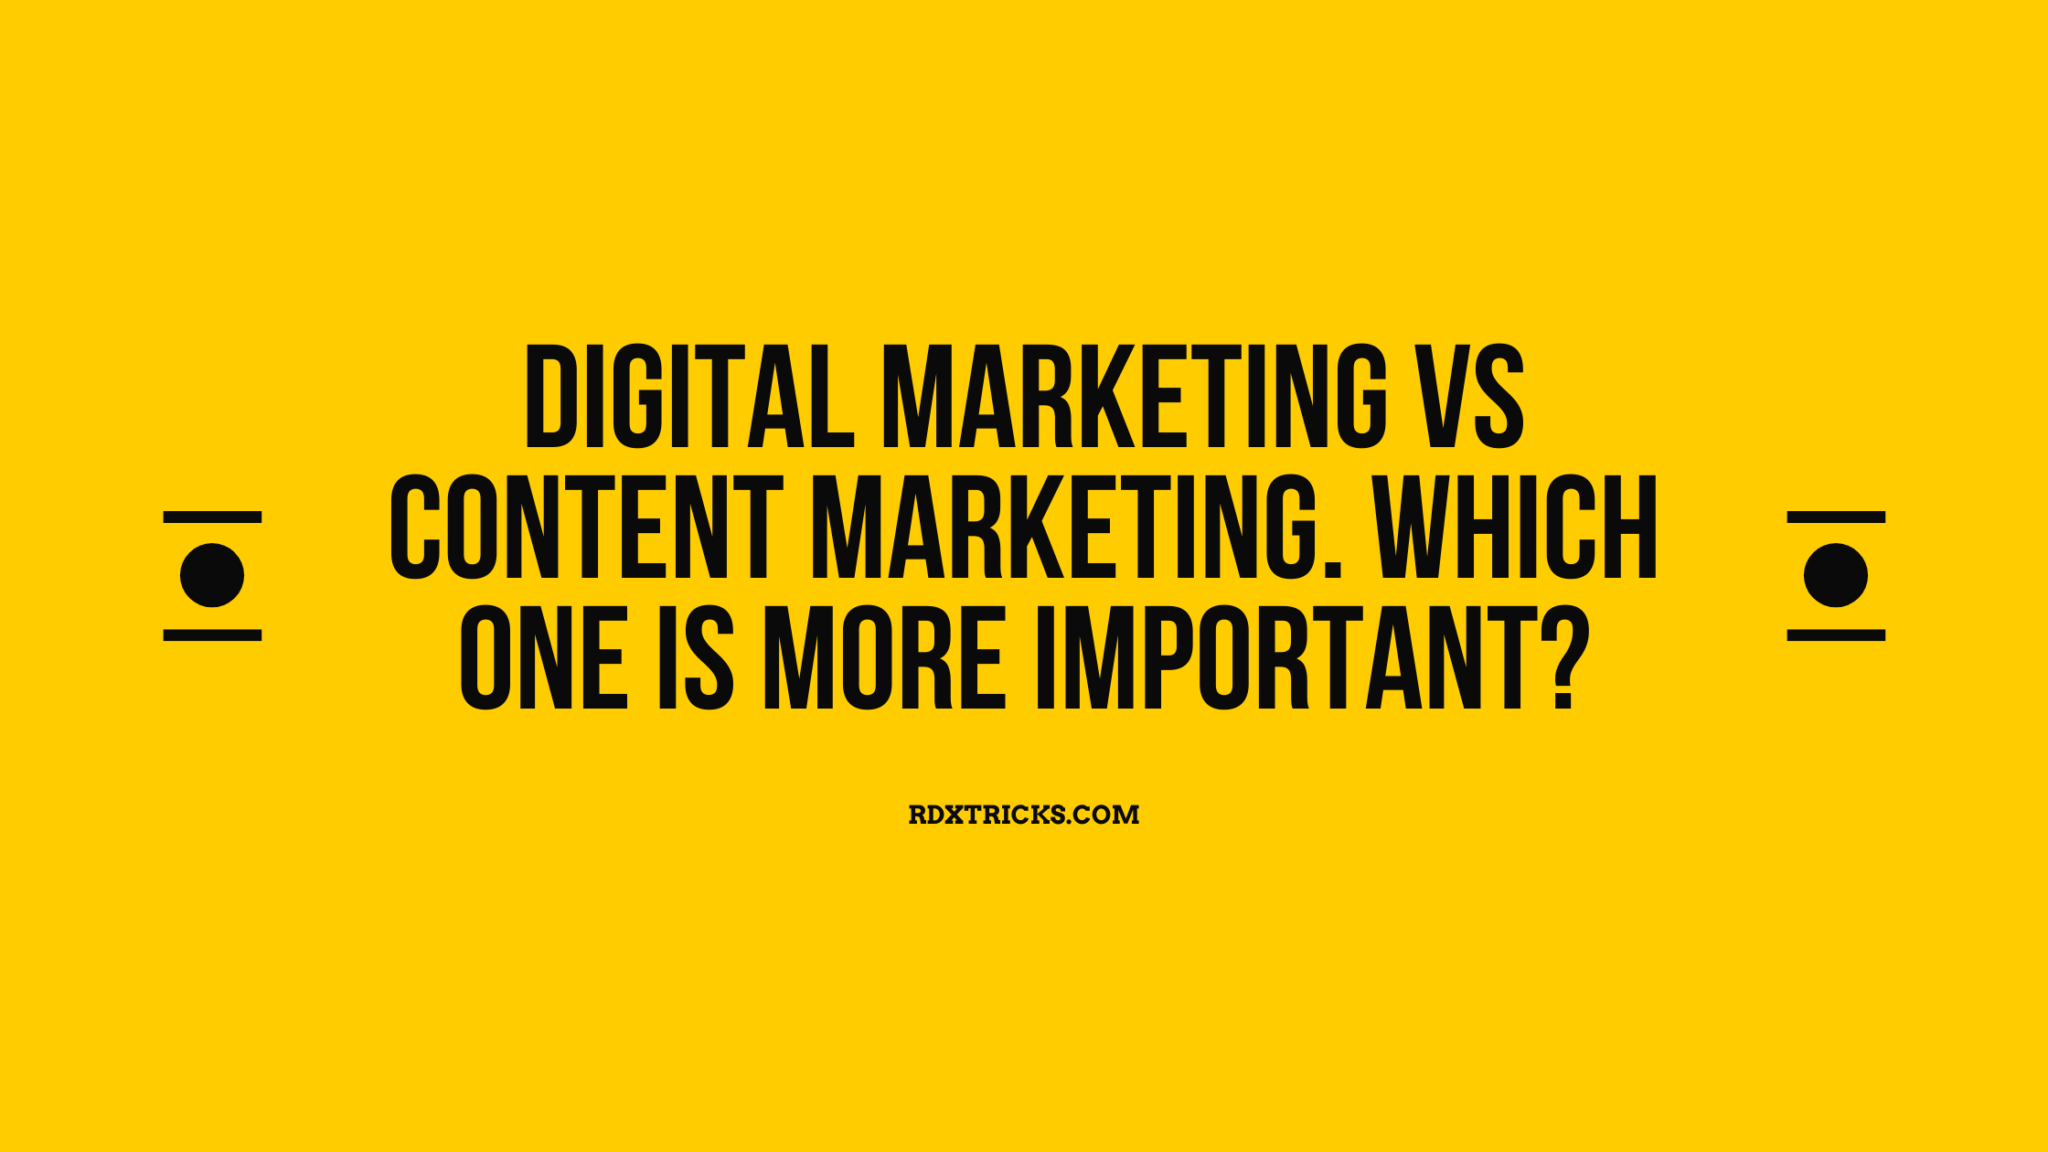 Digital Marketing Vs Content Marketing. Which One is More Important?